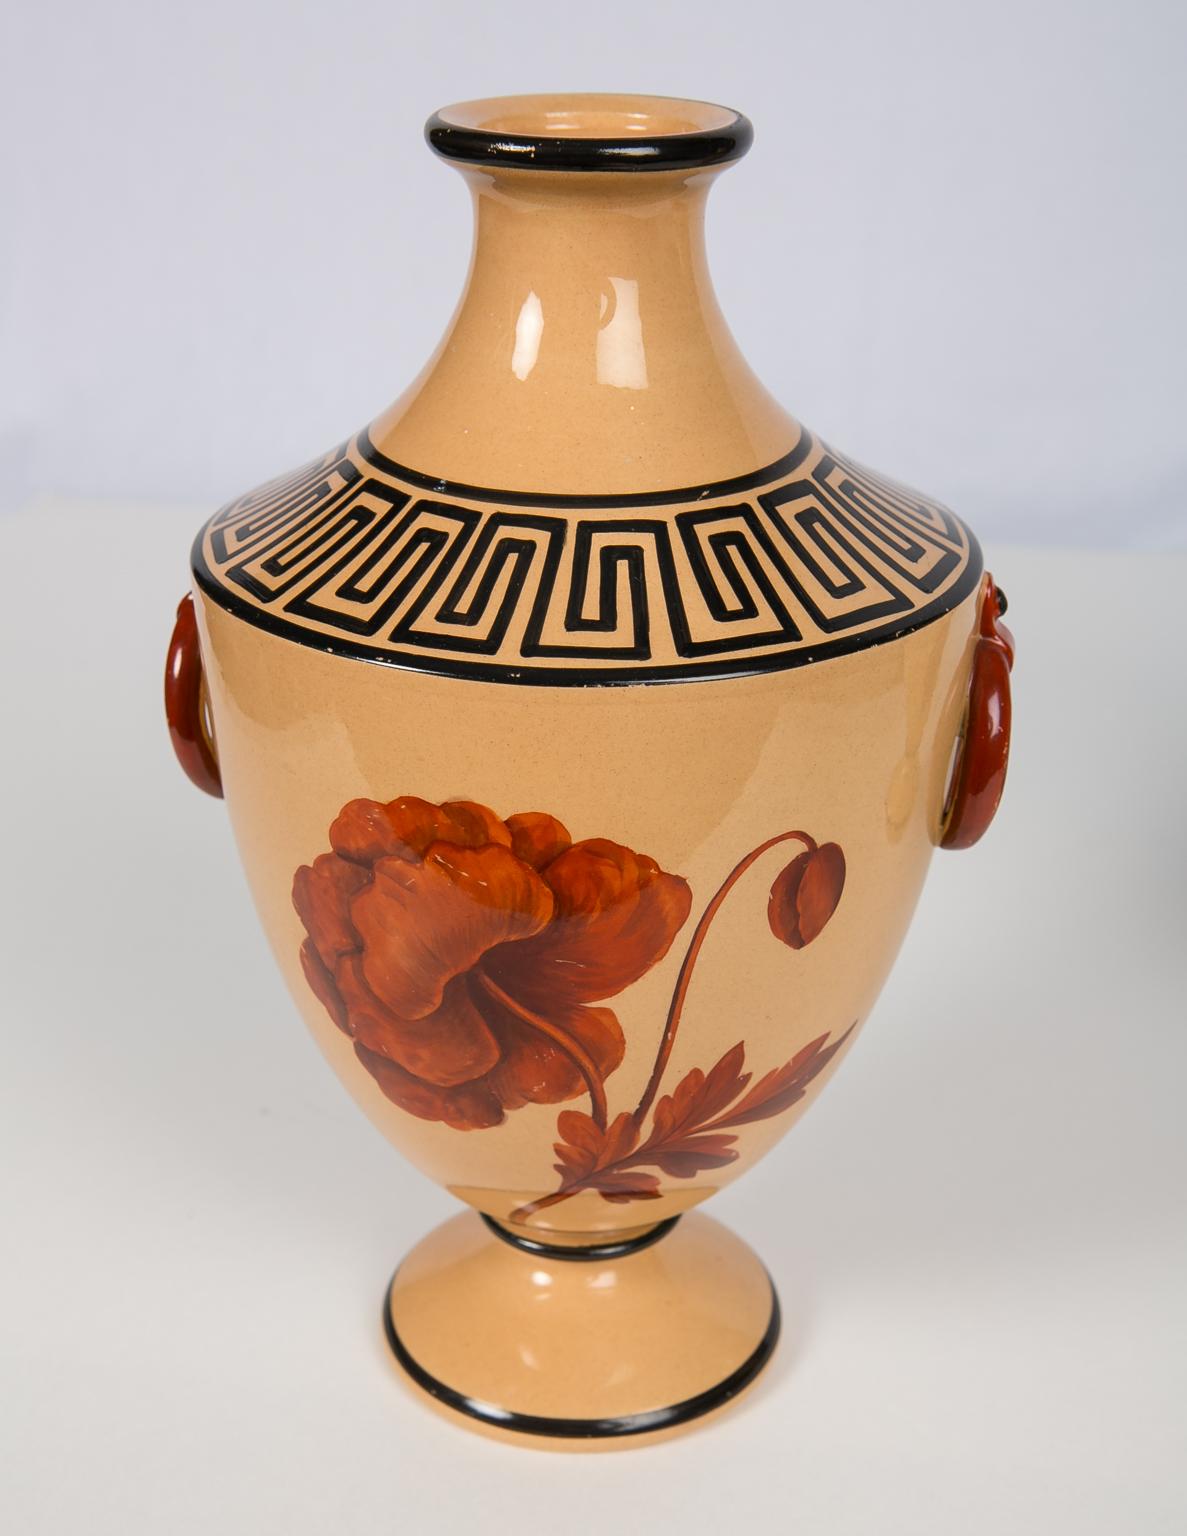 Vases with Large Red Flowers and Greek Key Decoration 3